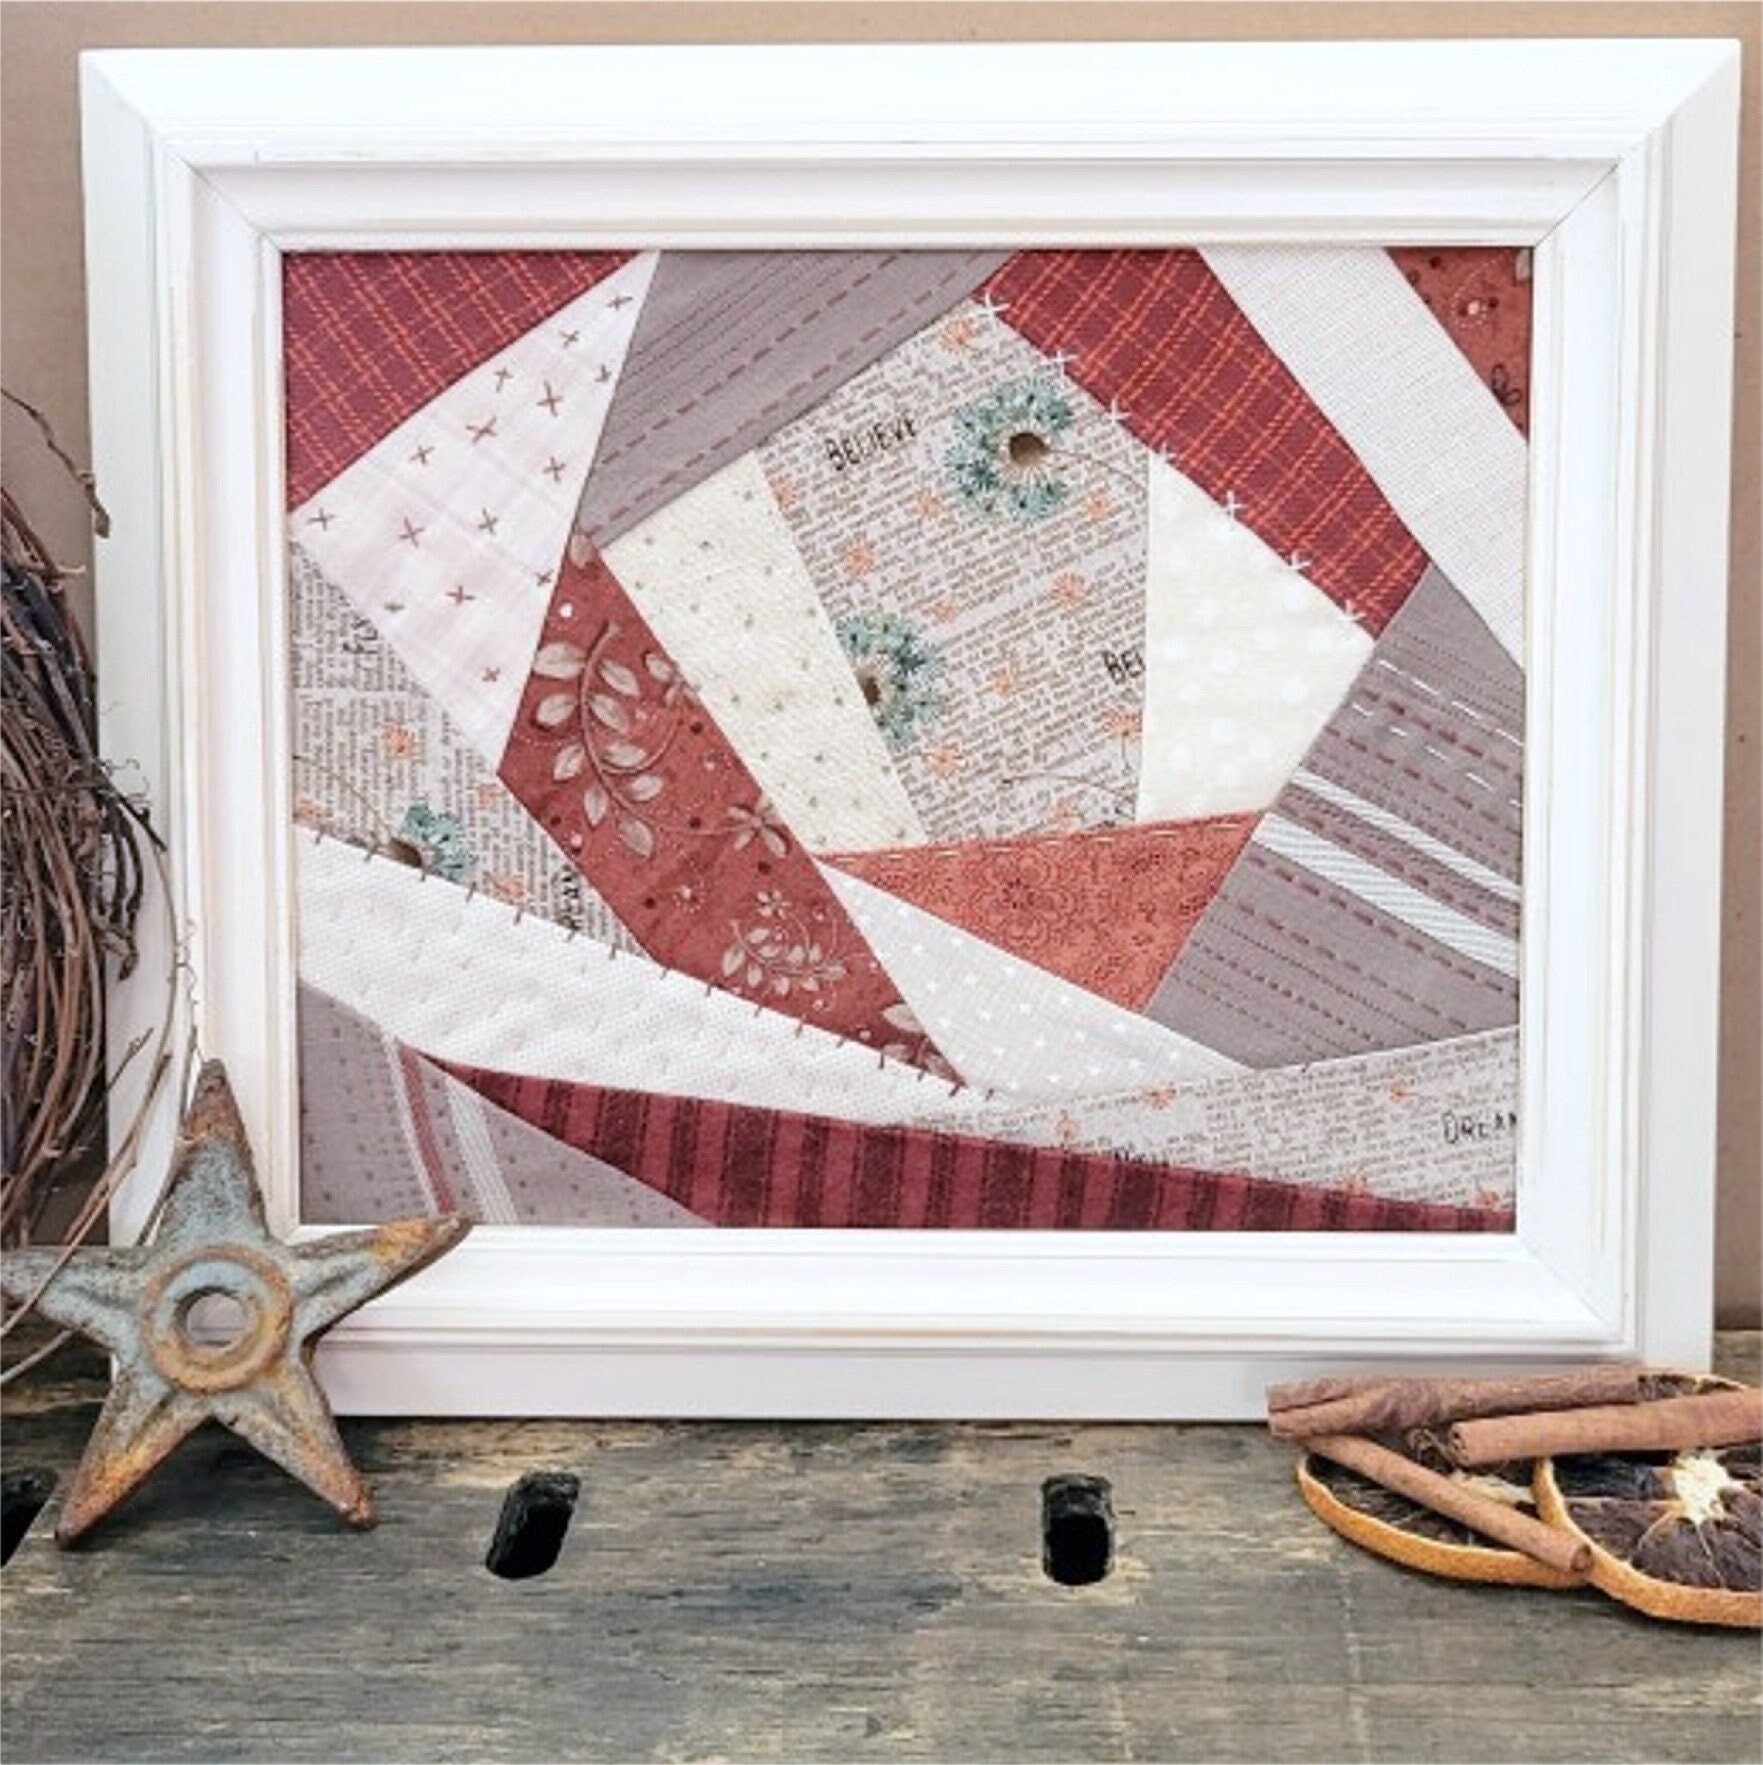 Old Hand Quilting Frames, Vintage Quilt Frame by SusquehannaSweeties on